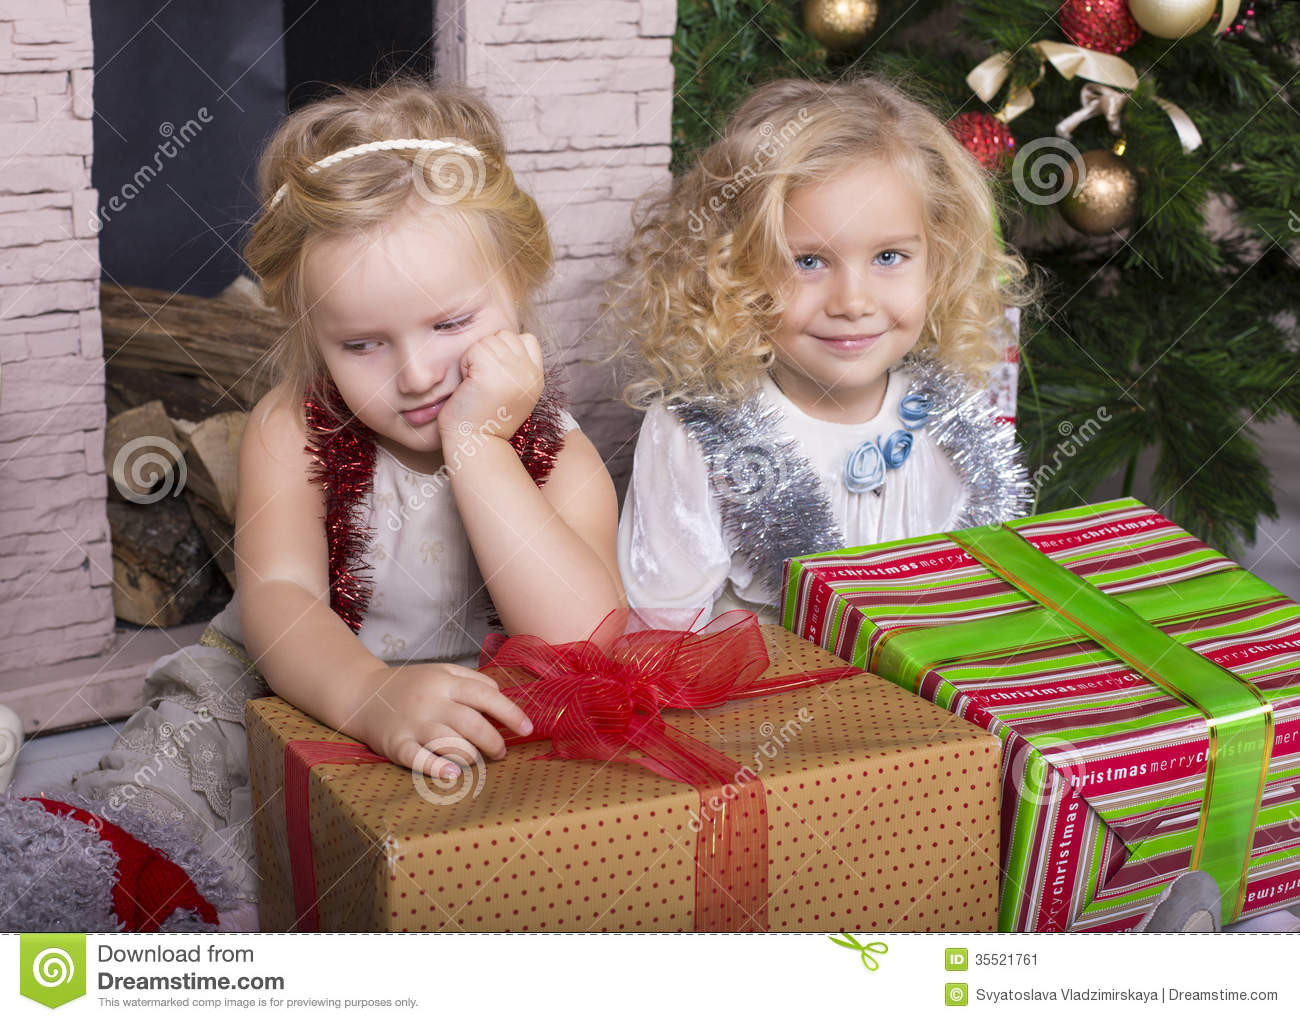 Funny Kids Gifts
 Funny Kids With Christmas Gift Stock Image Image of love